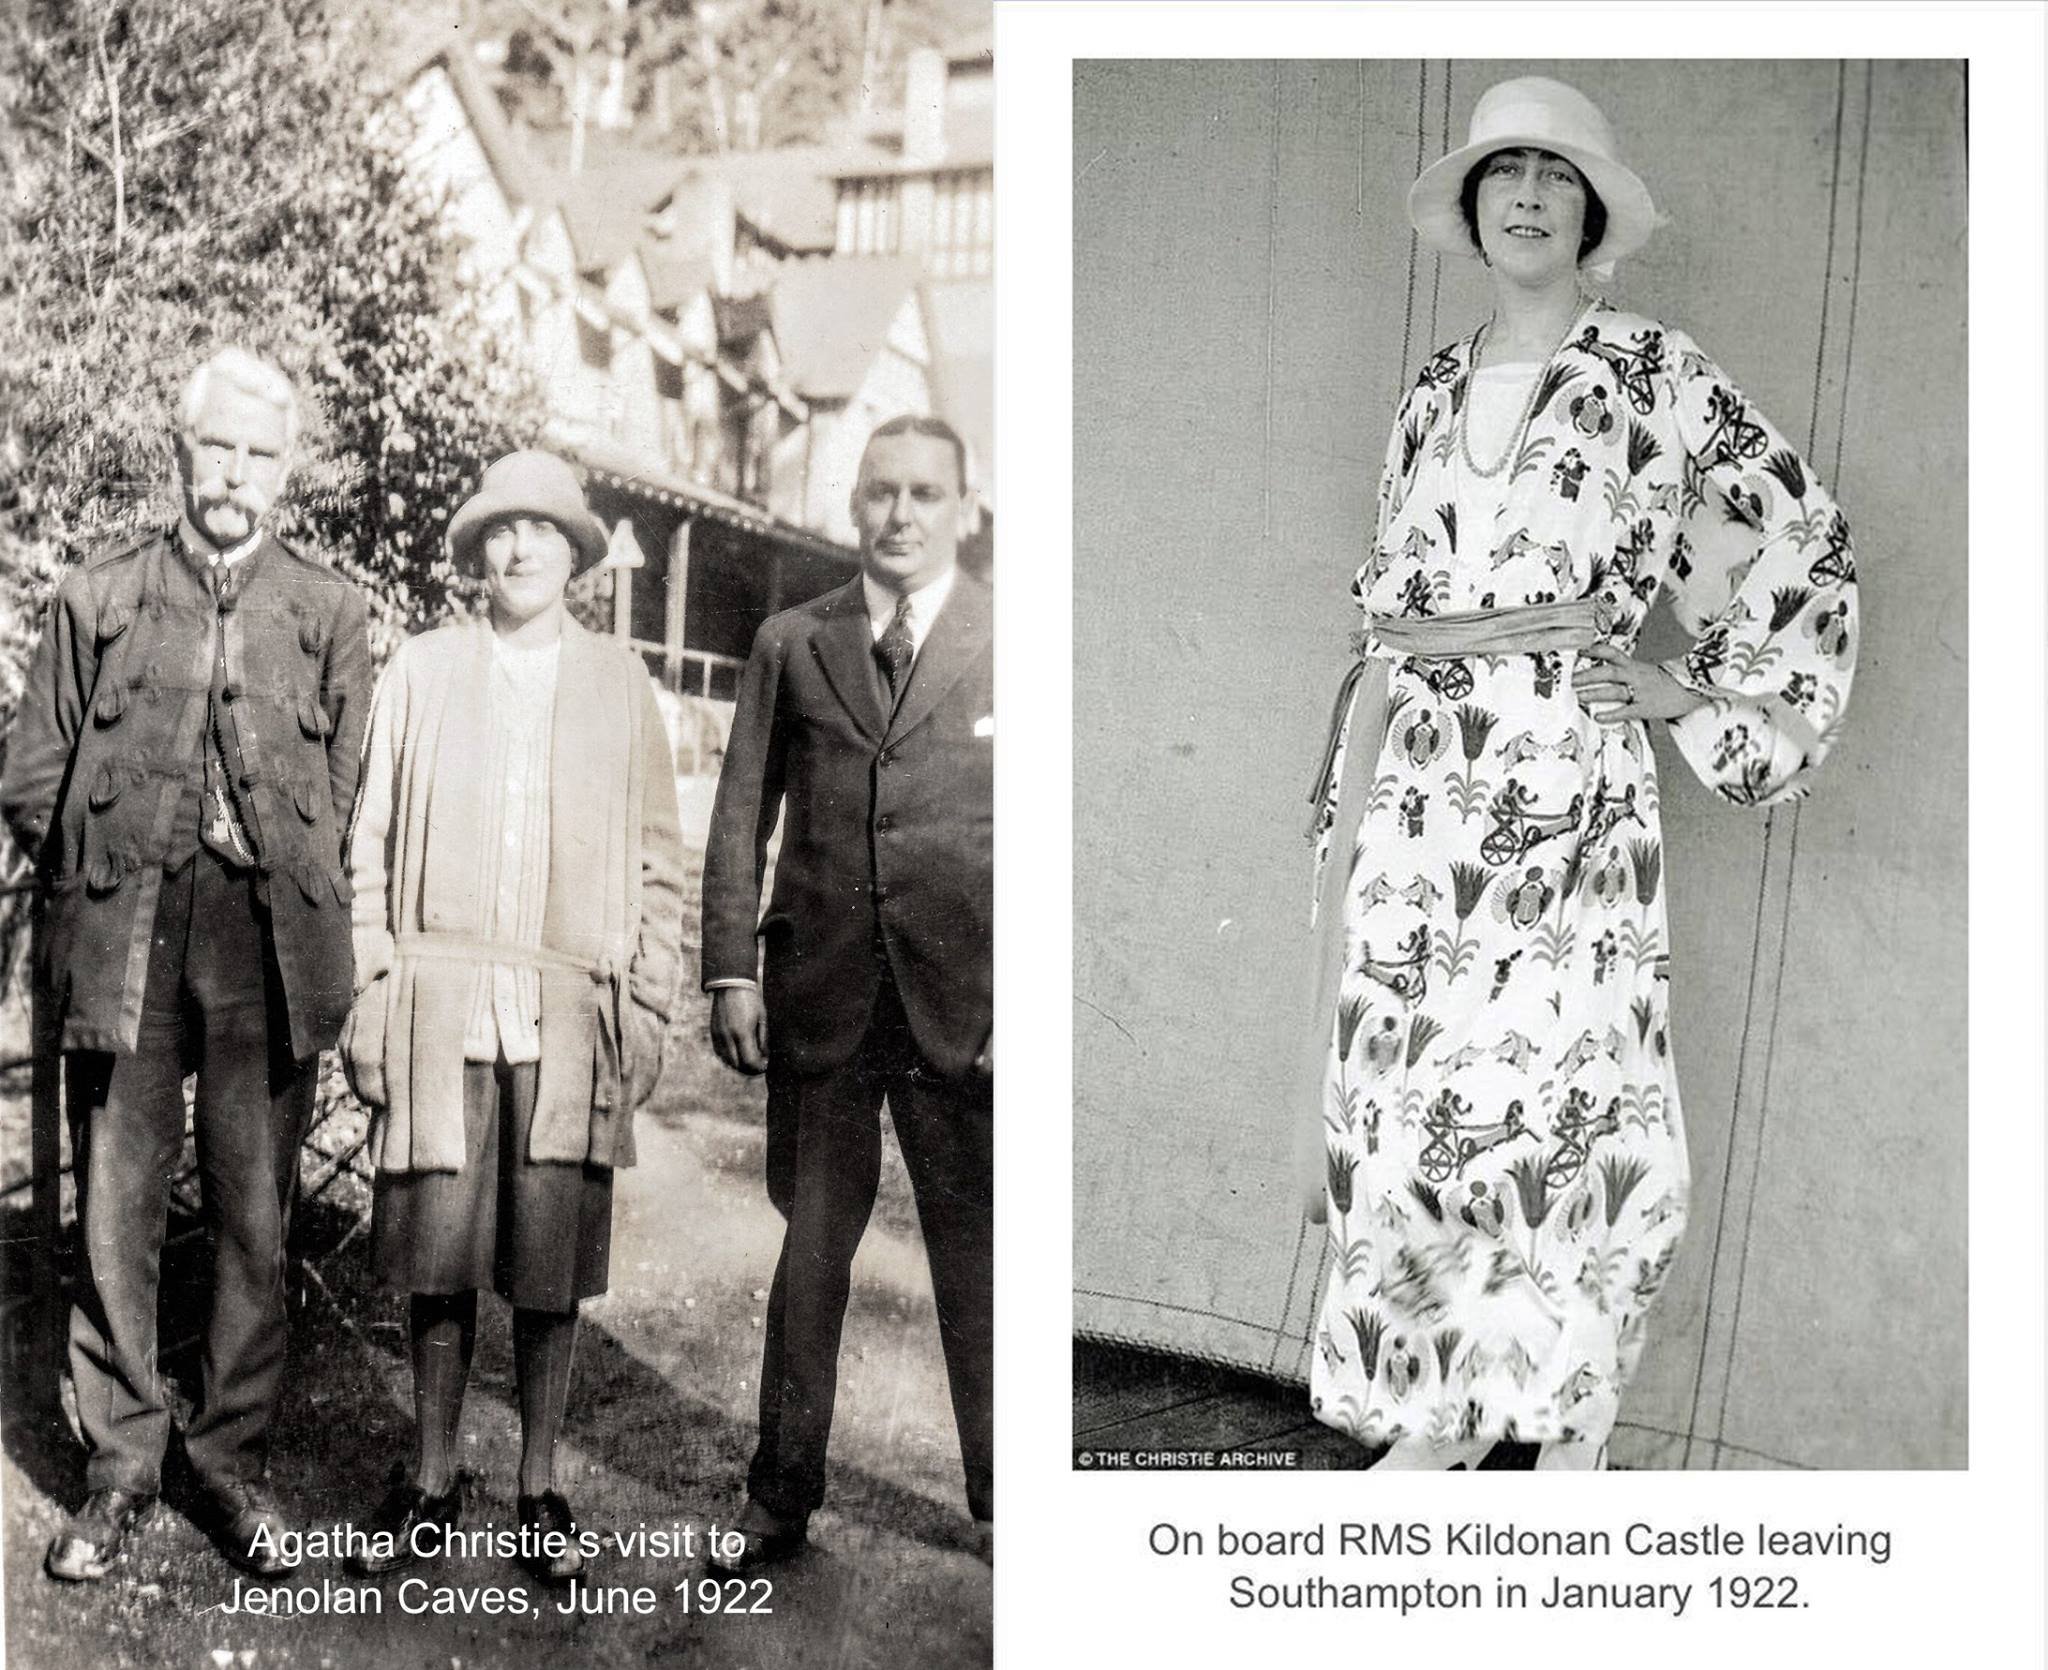 Did you know Agatha Christie visited Jenolan Caves?!

Agatha is pictured here with JC Wiburd on her left.
Agatha included Jenolan in her book 'The Grand Tour: Around the world with the Queen of mystery'.

&quot;We saw another cave, the right imperial